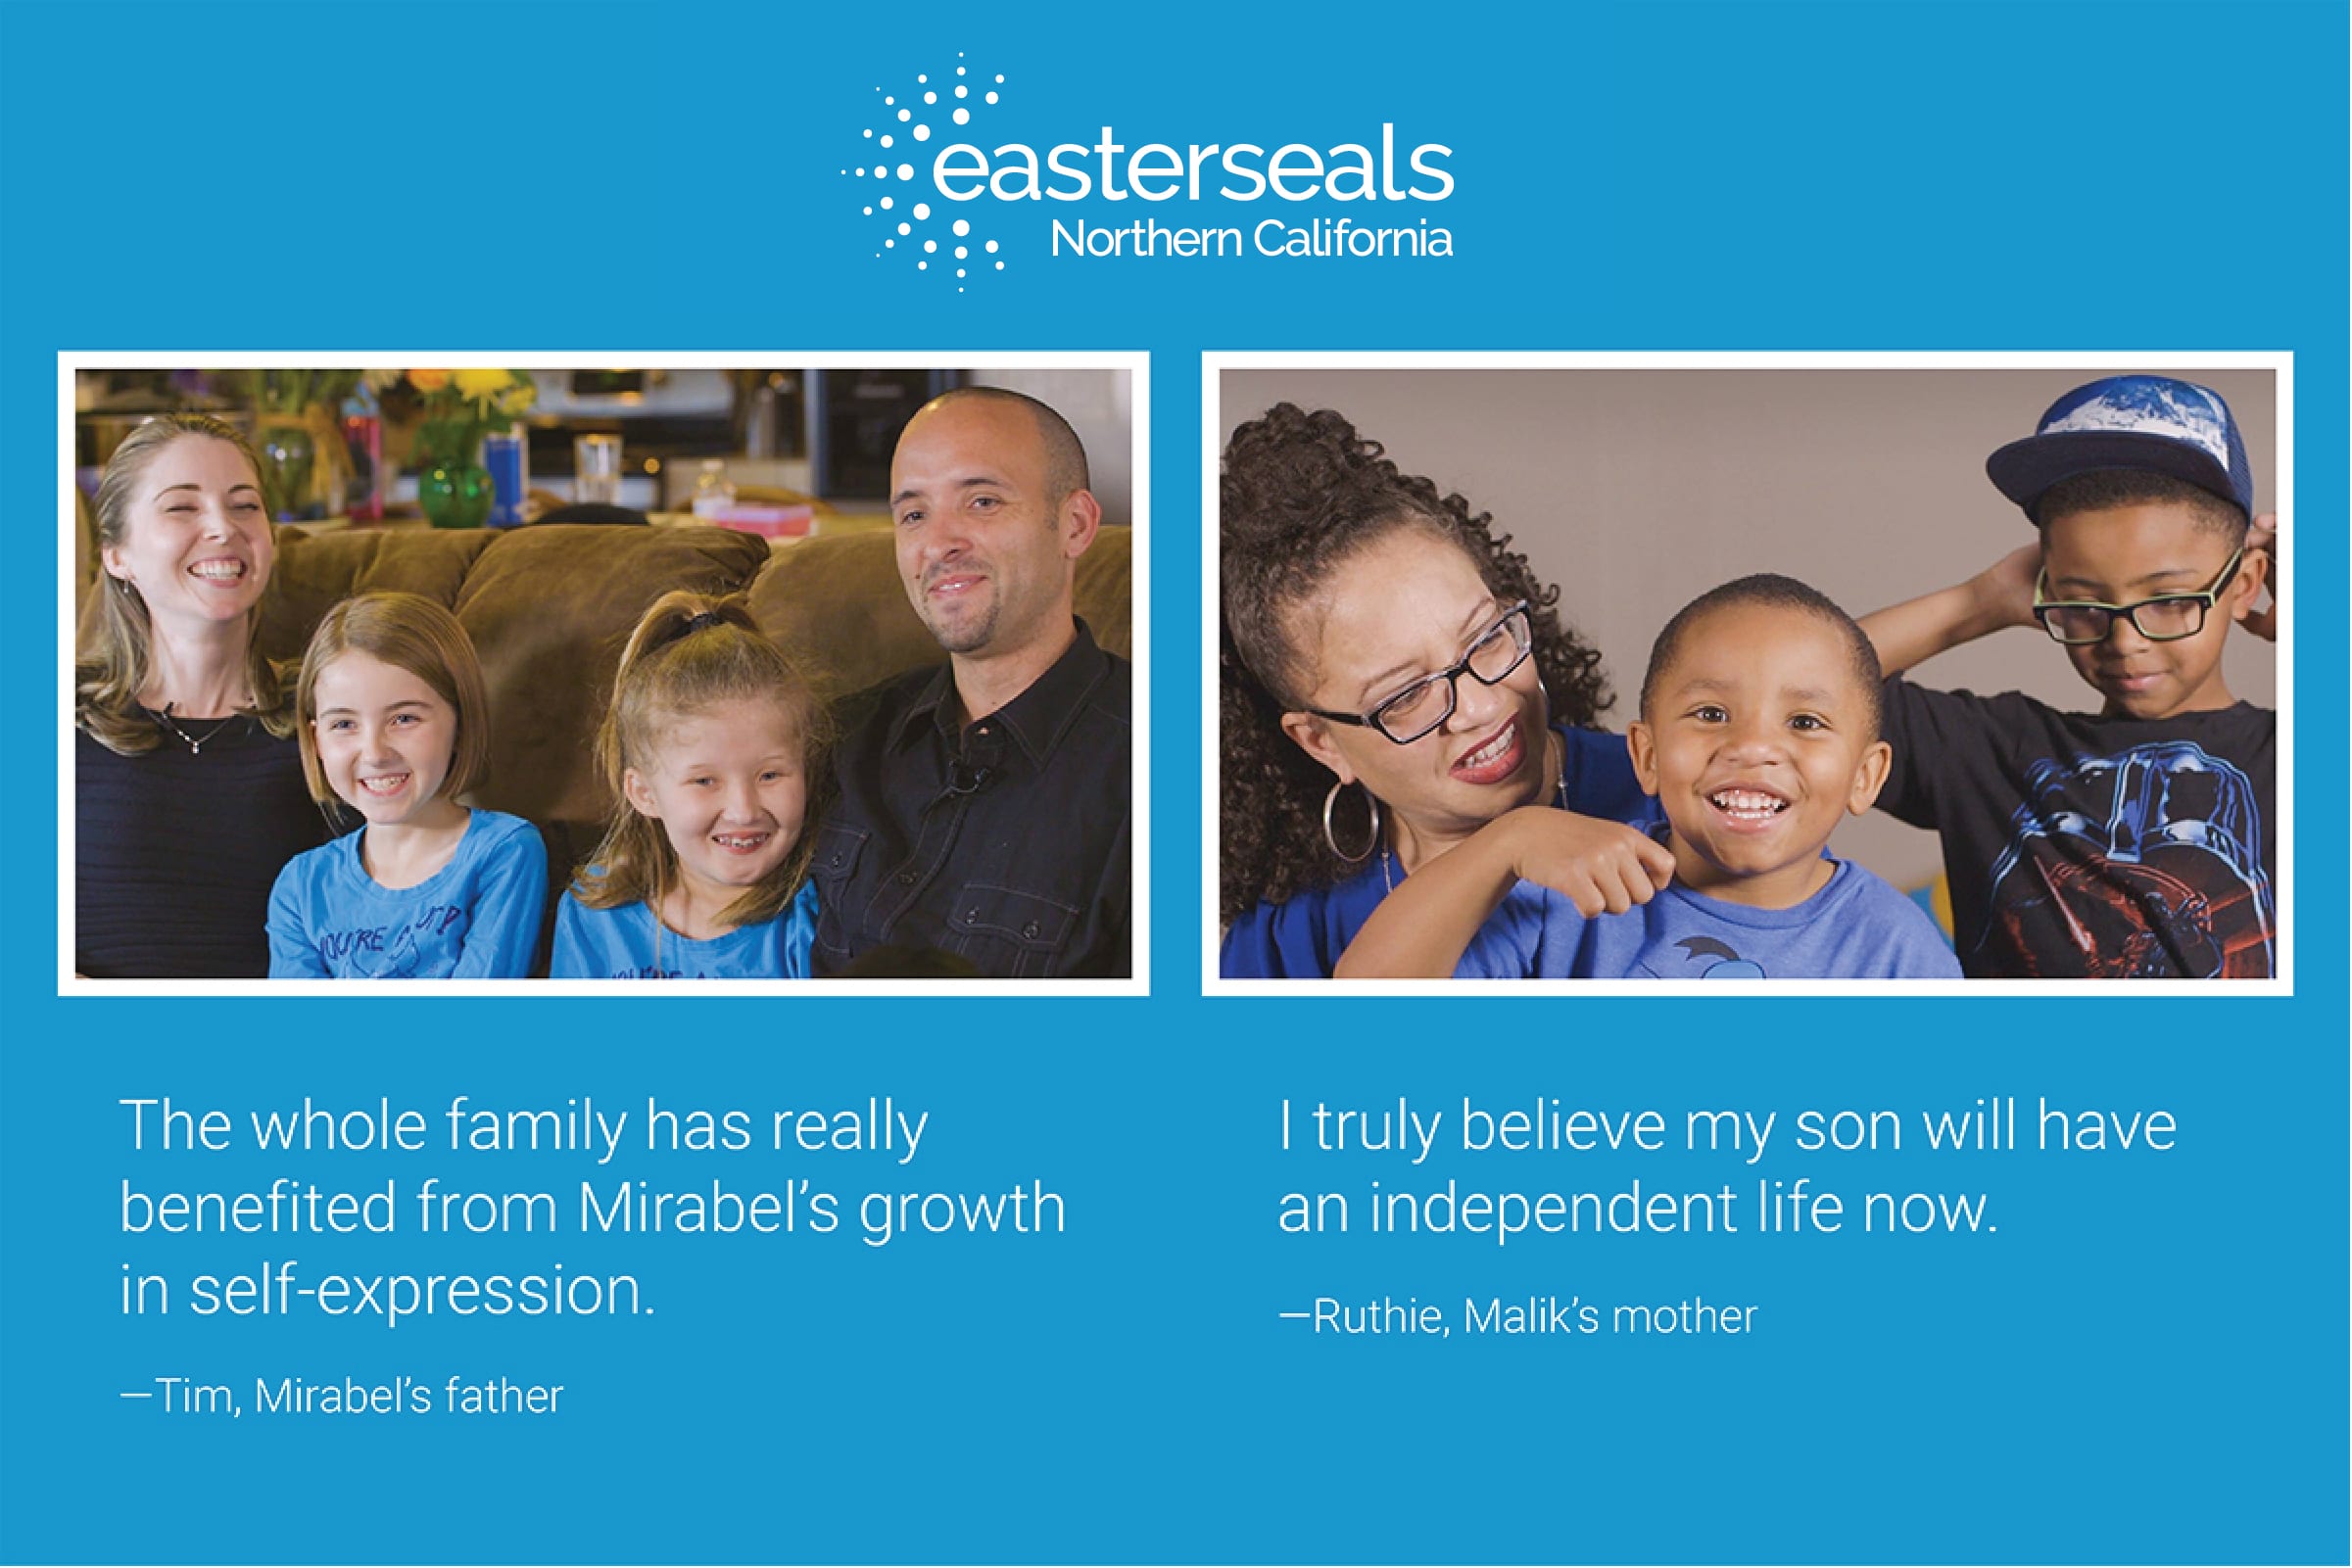  On left, a family of a mother, father and two daughters with a quote reading The whole family has really benefitted from Mirable’s growth in self-expression. On right, a family of a mother and two sons with a quote reading I truly believe my son will have an independent life now.